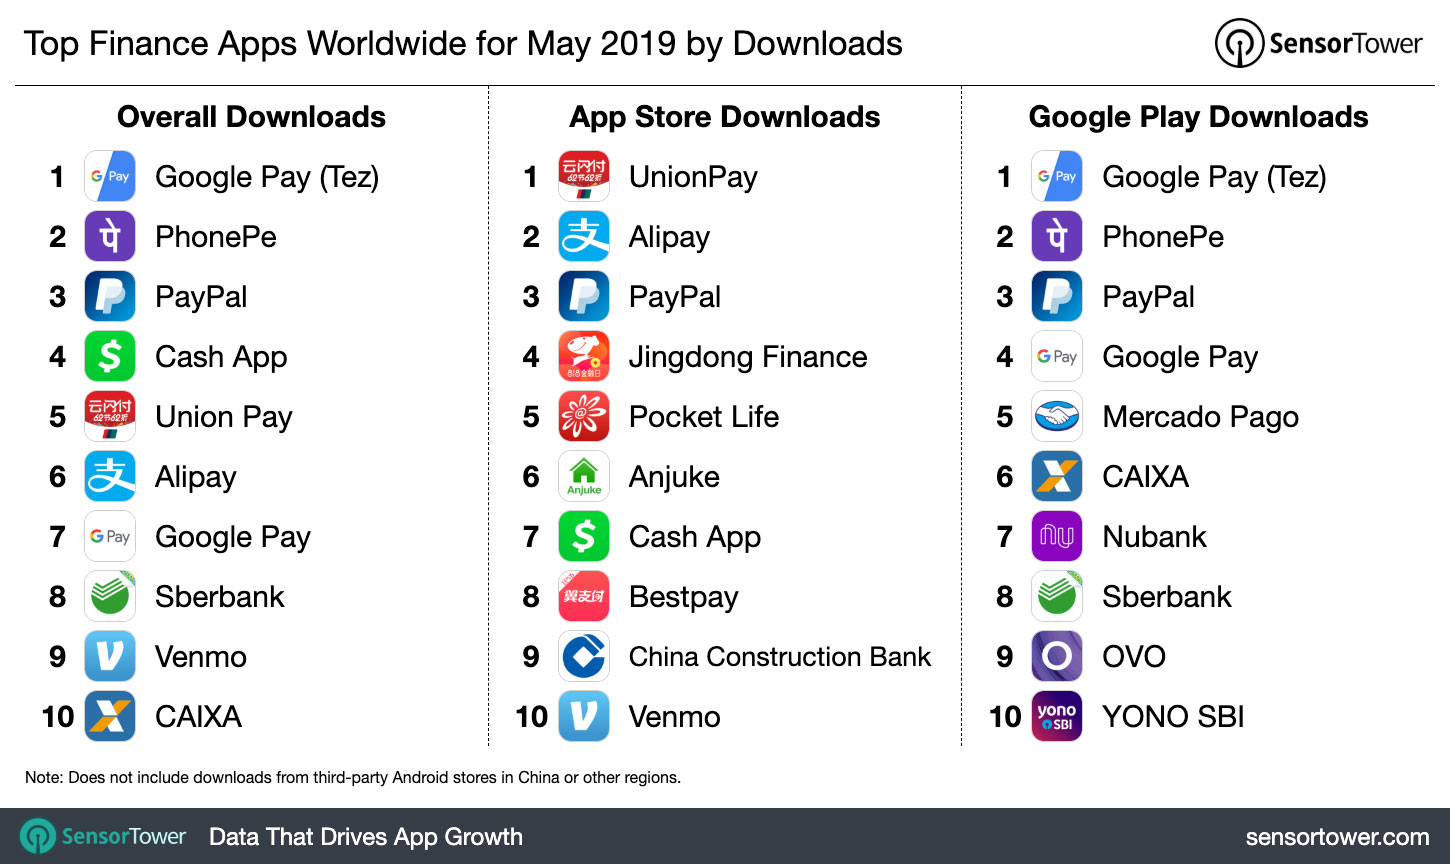 Top Finance Apps Worldwide for May 2019 by Downloads